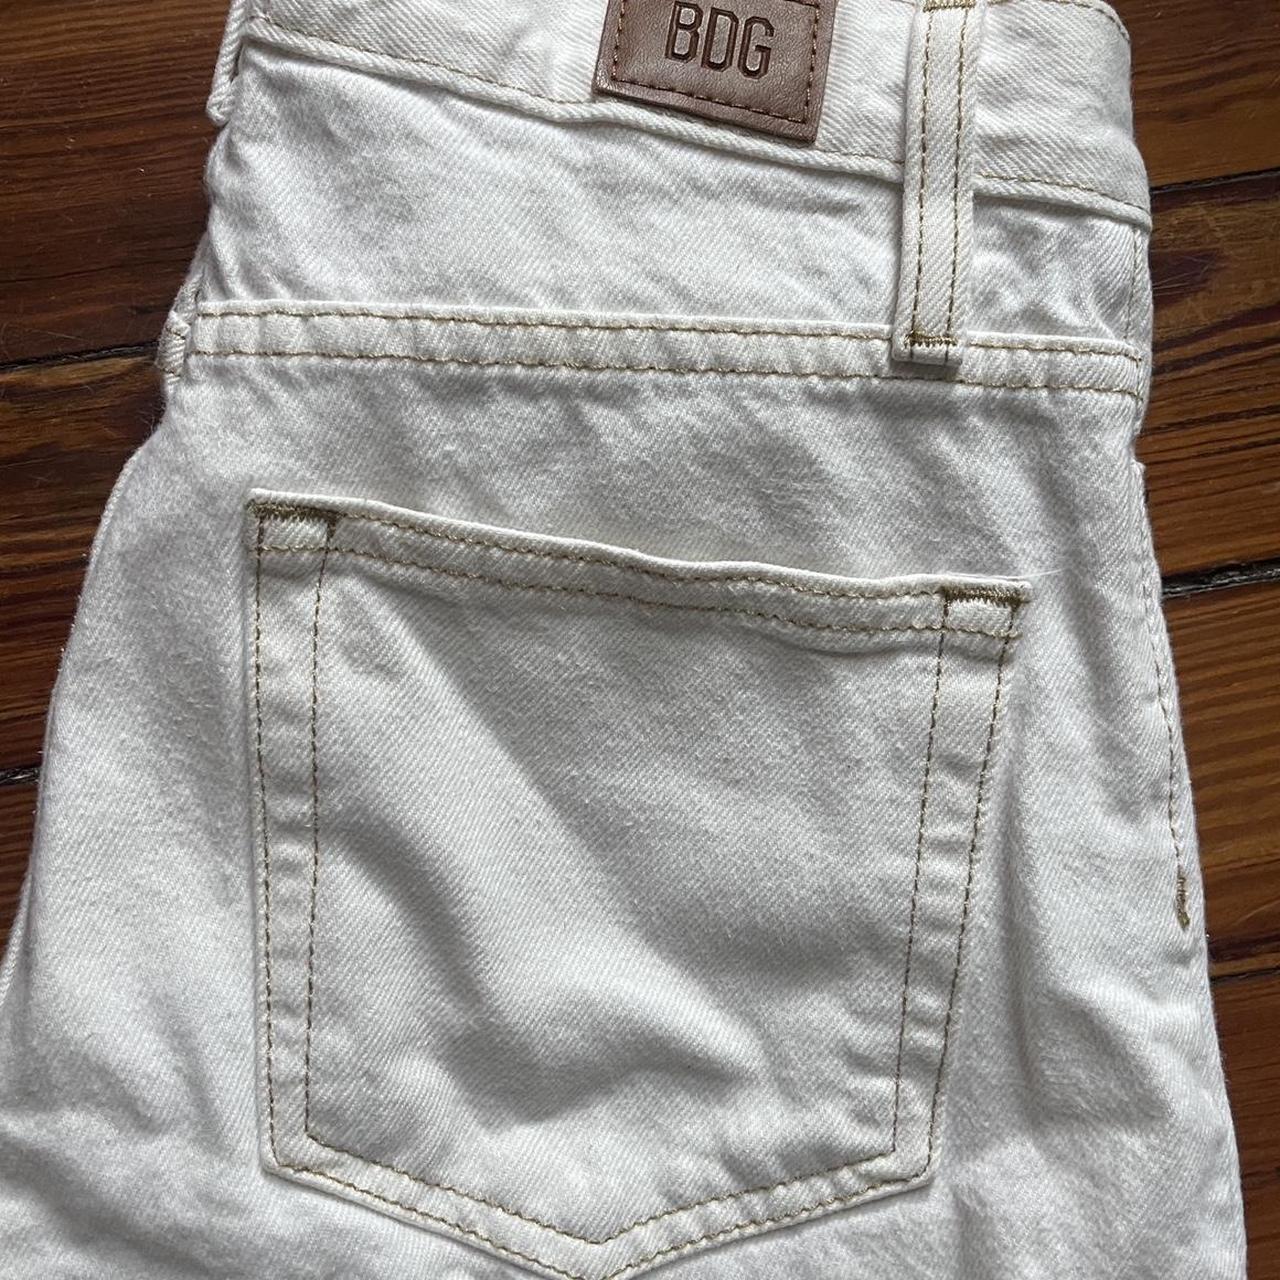 Bdg cream cowboy jean, so cute on just too tight for... - Depop